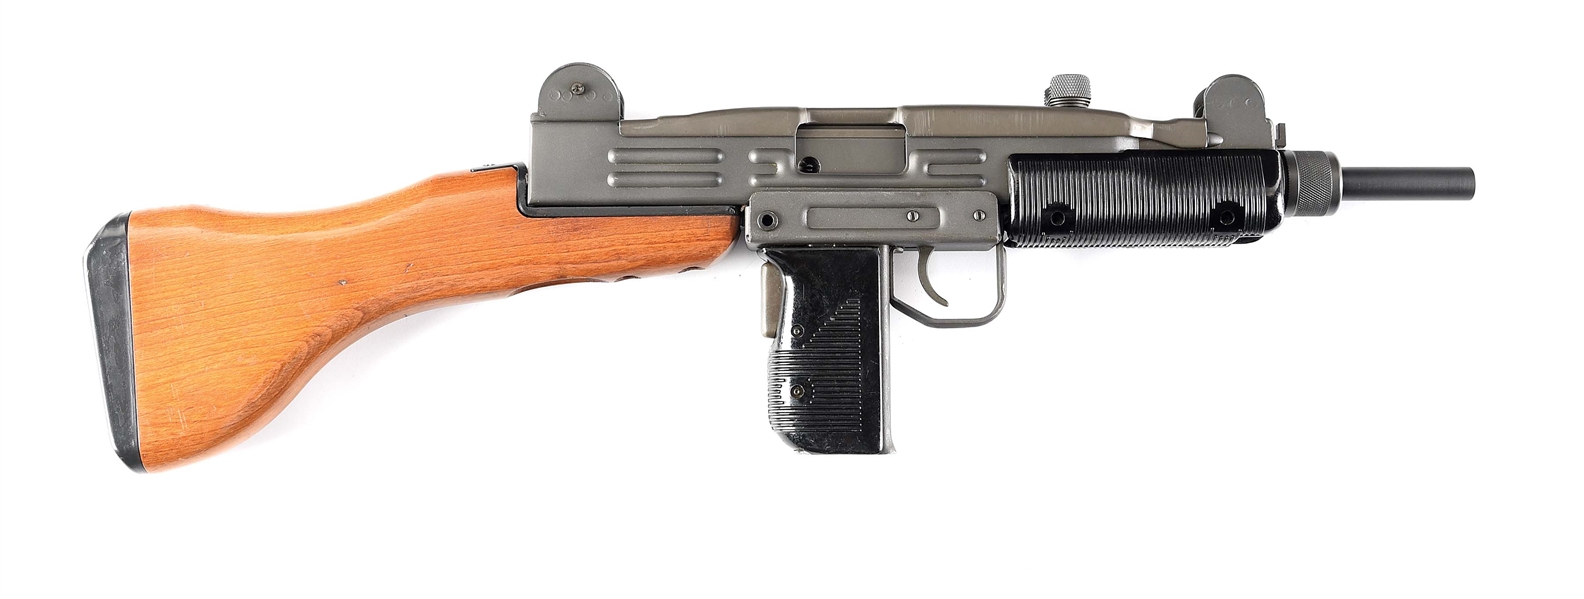 (N) HIGHLY SOUGHT AFTER CURIO & RELIC ELIGIBLE ISRAELI MILITARY INDUSTRIES UZI MODEL A SUBMACHINE GUN (CURIO & RELIC).